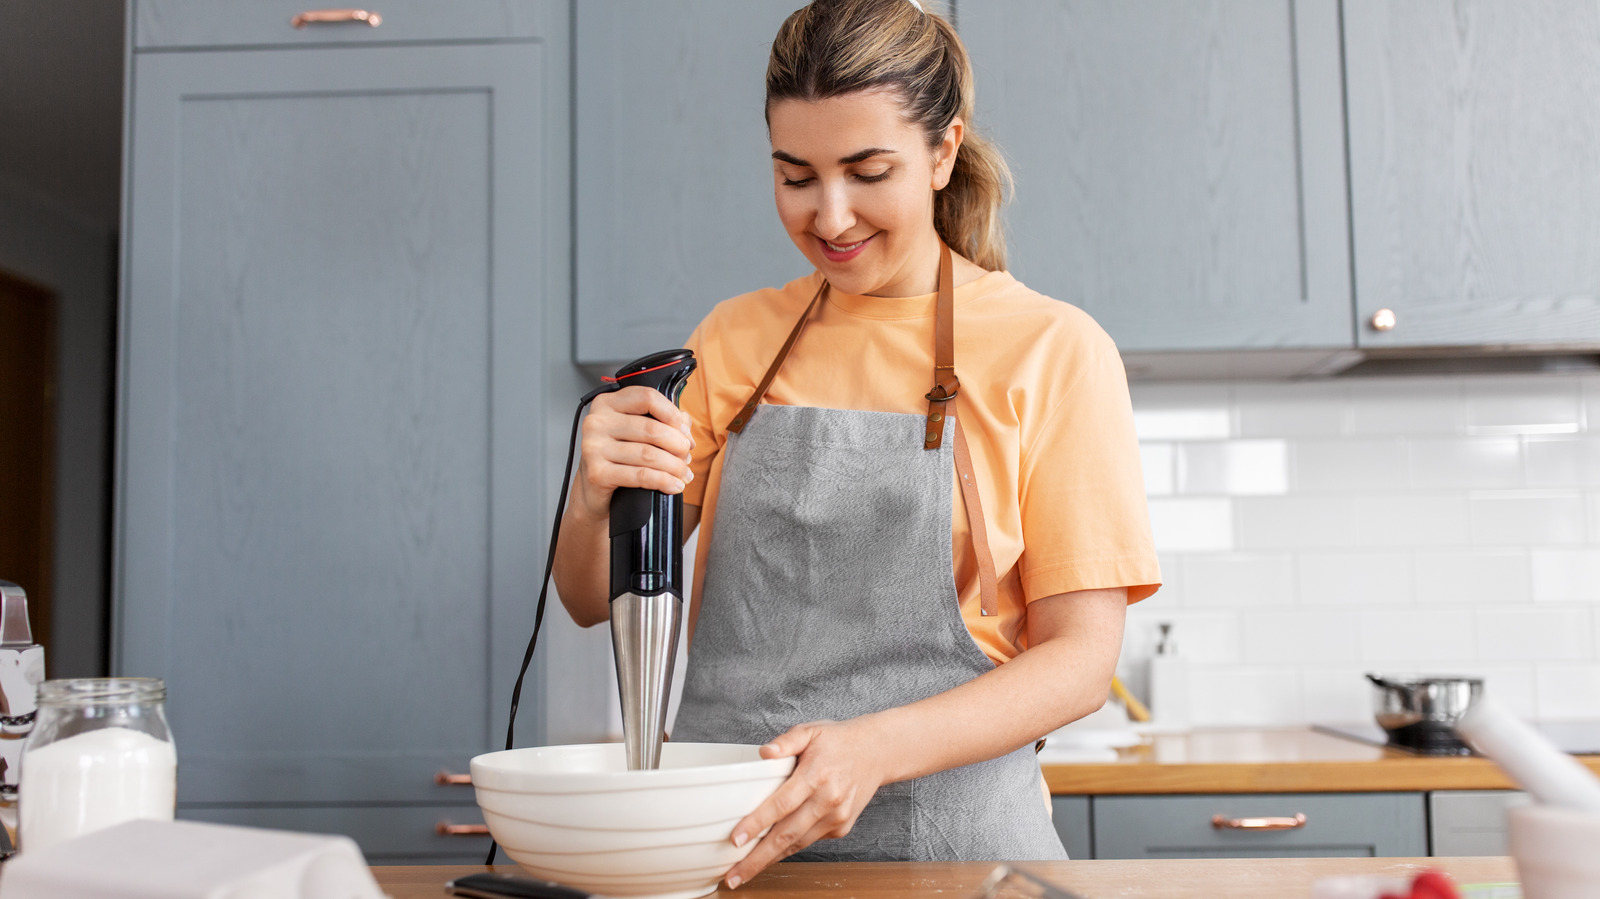 reach Prominent betrayal The 15 Absolute Best Uses For Your Immersion Blender